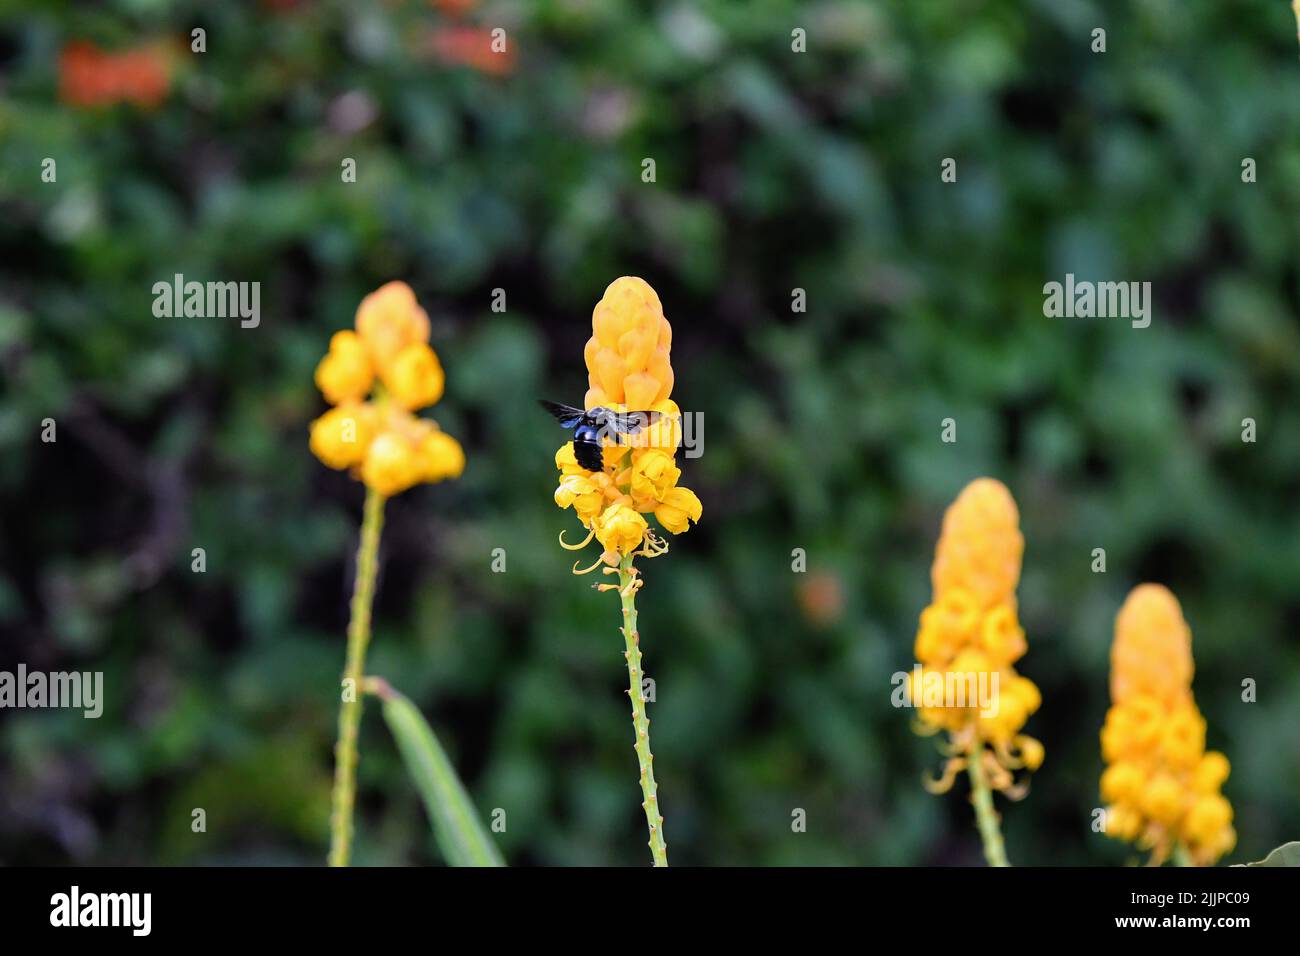 A selective focus shot of a Alexandrian senna flower with an insect collecting pollen Stock Photo